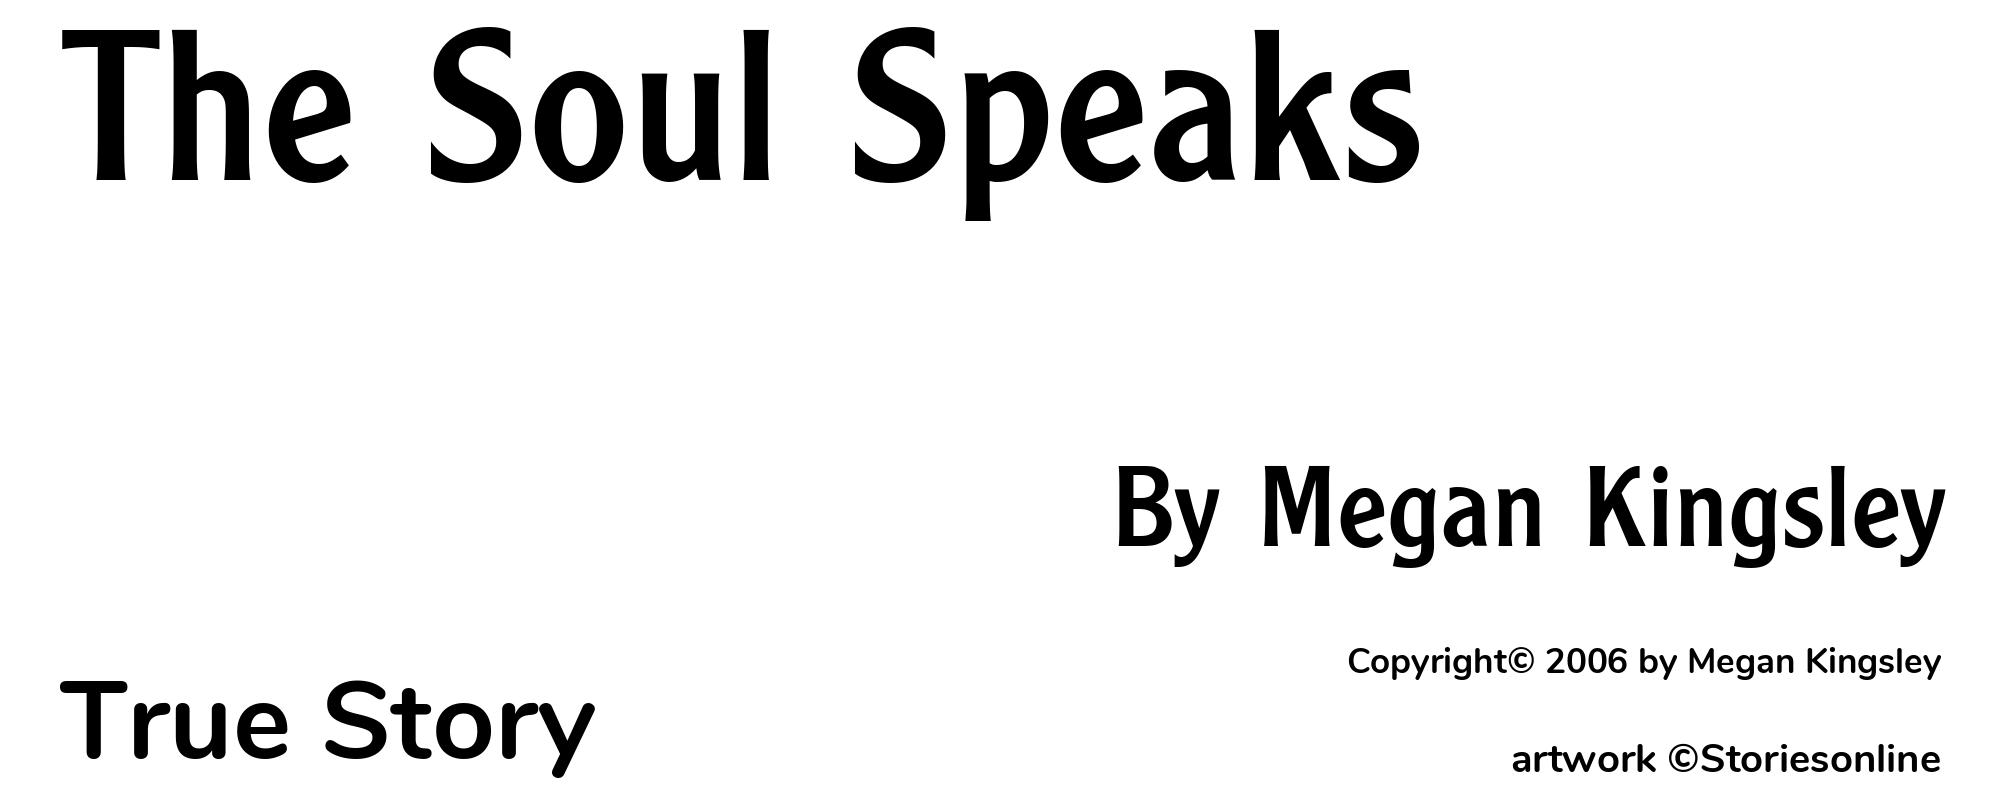 The Soul Speaks - Cover